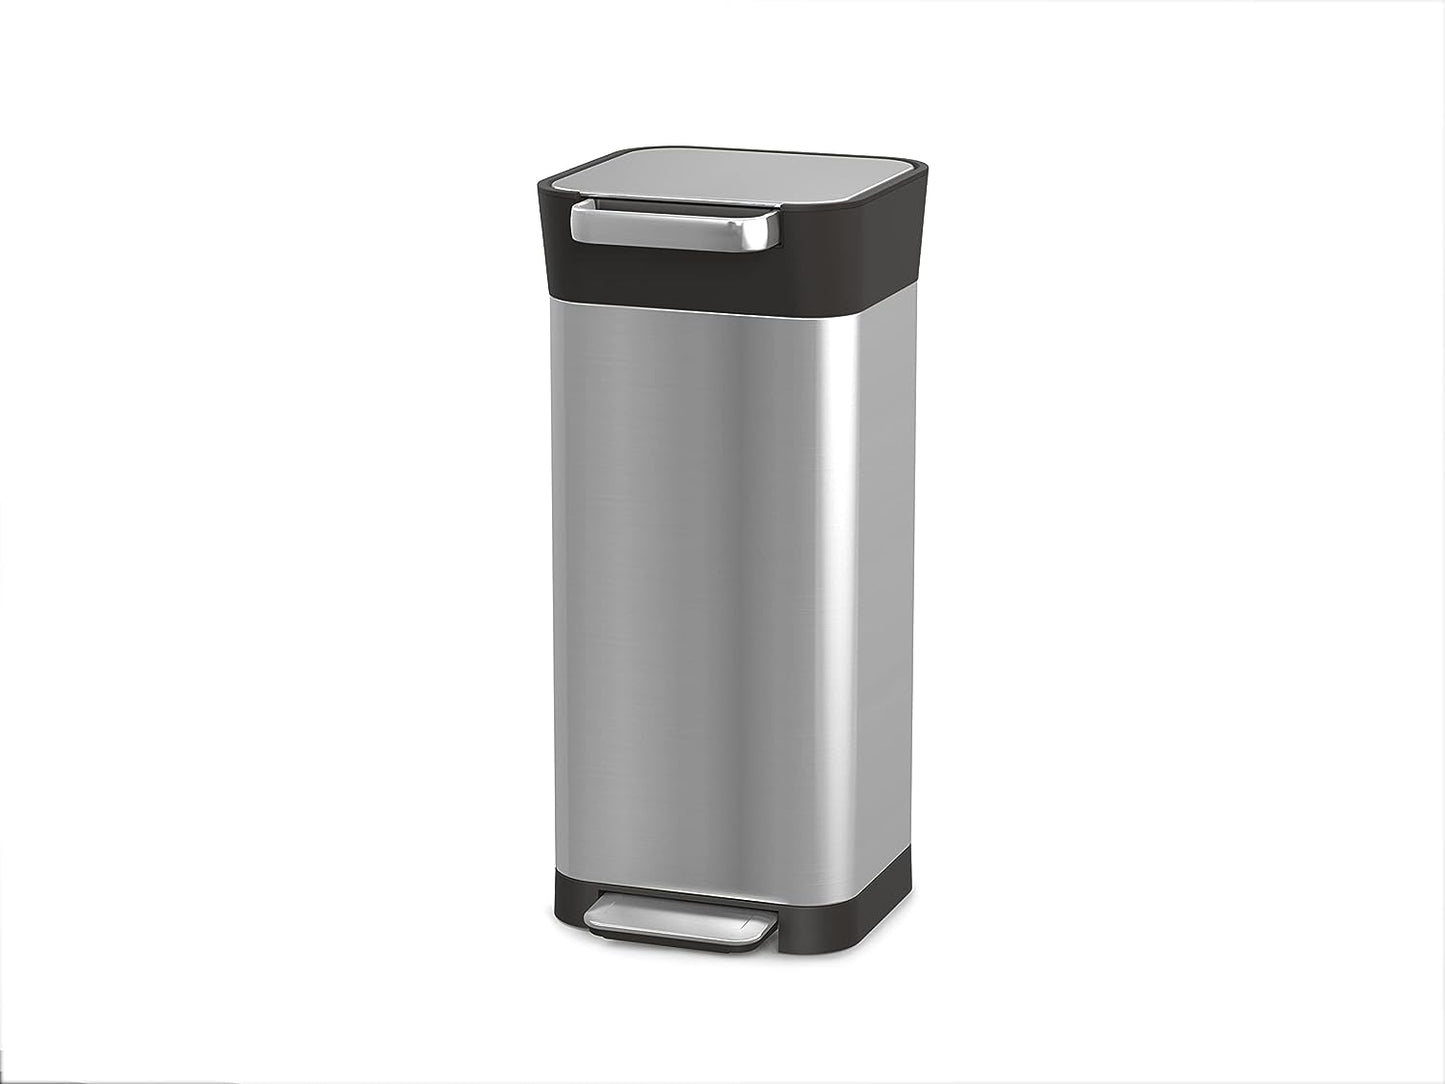 (⭐⭐ HOT SALE NOW)  Intelligent Waste Titan Trash Can Compactor with Odor Filter